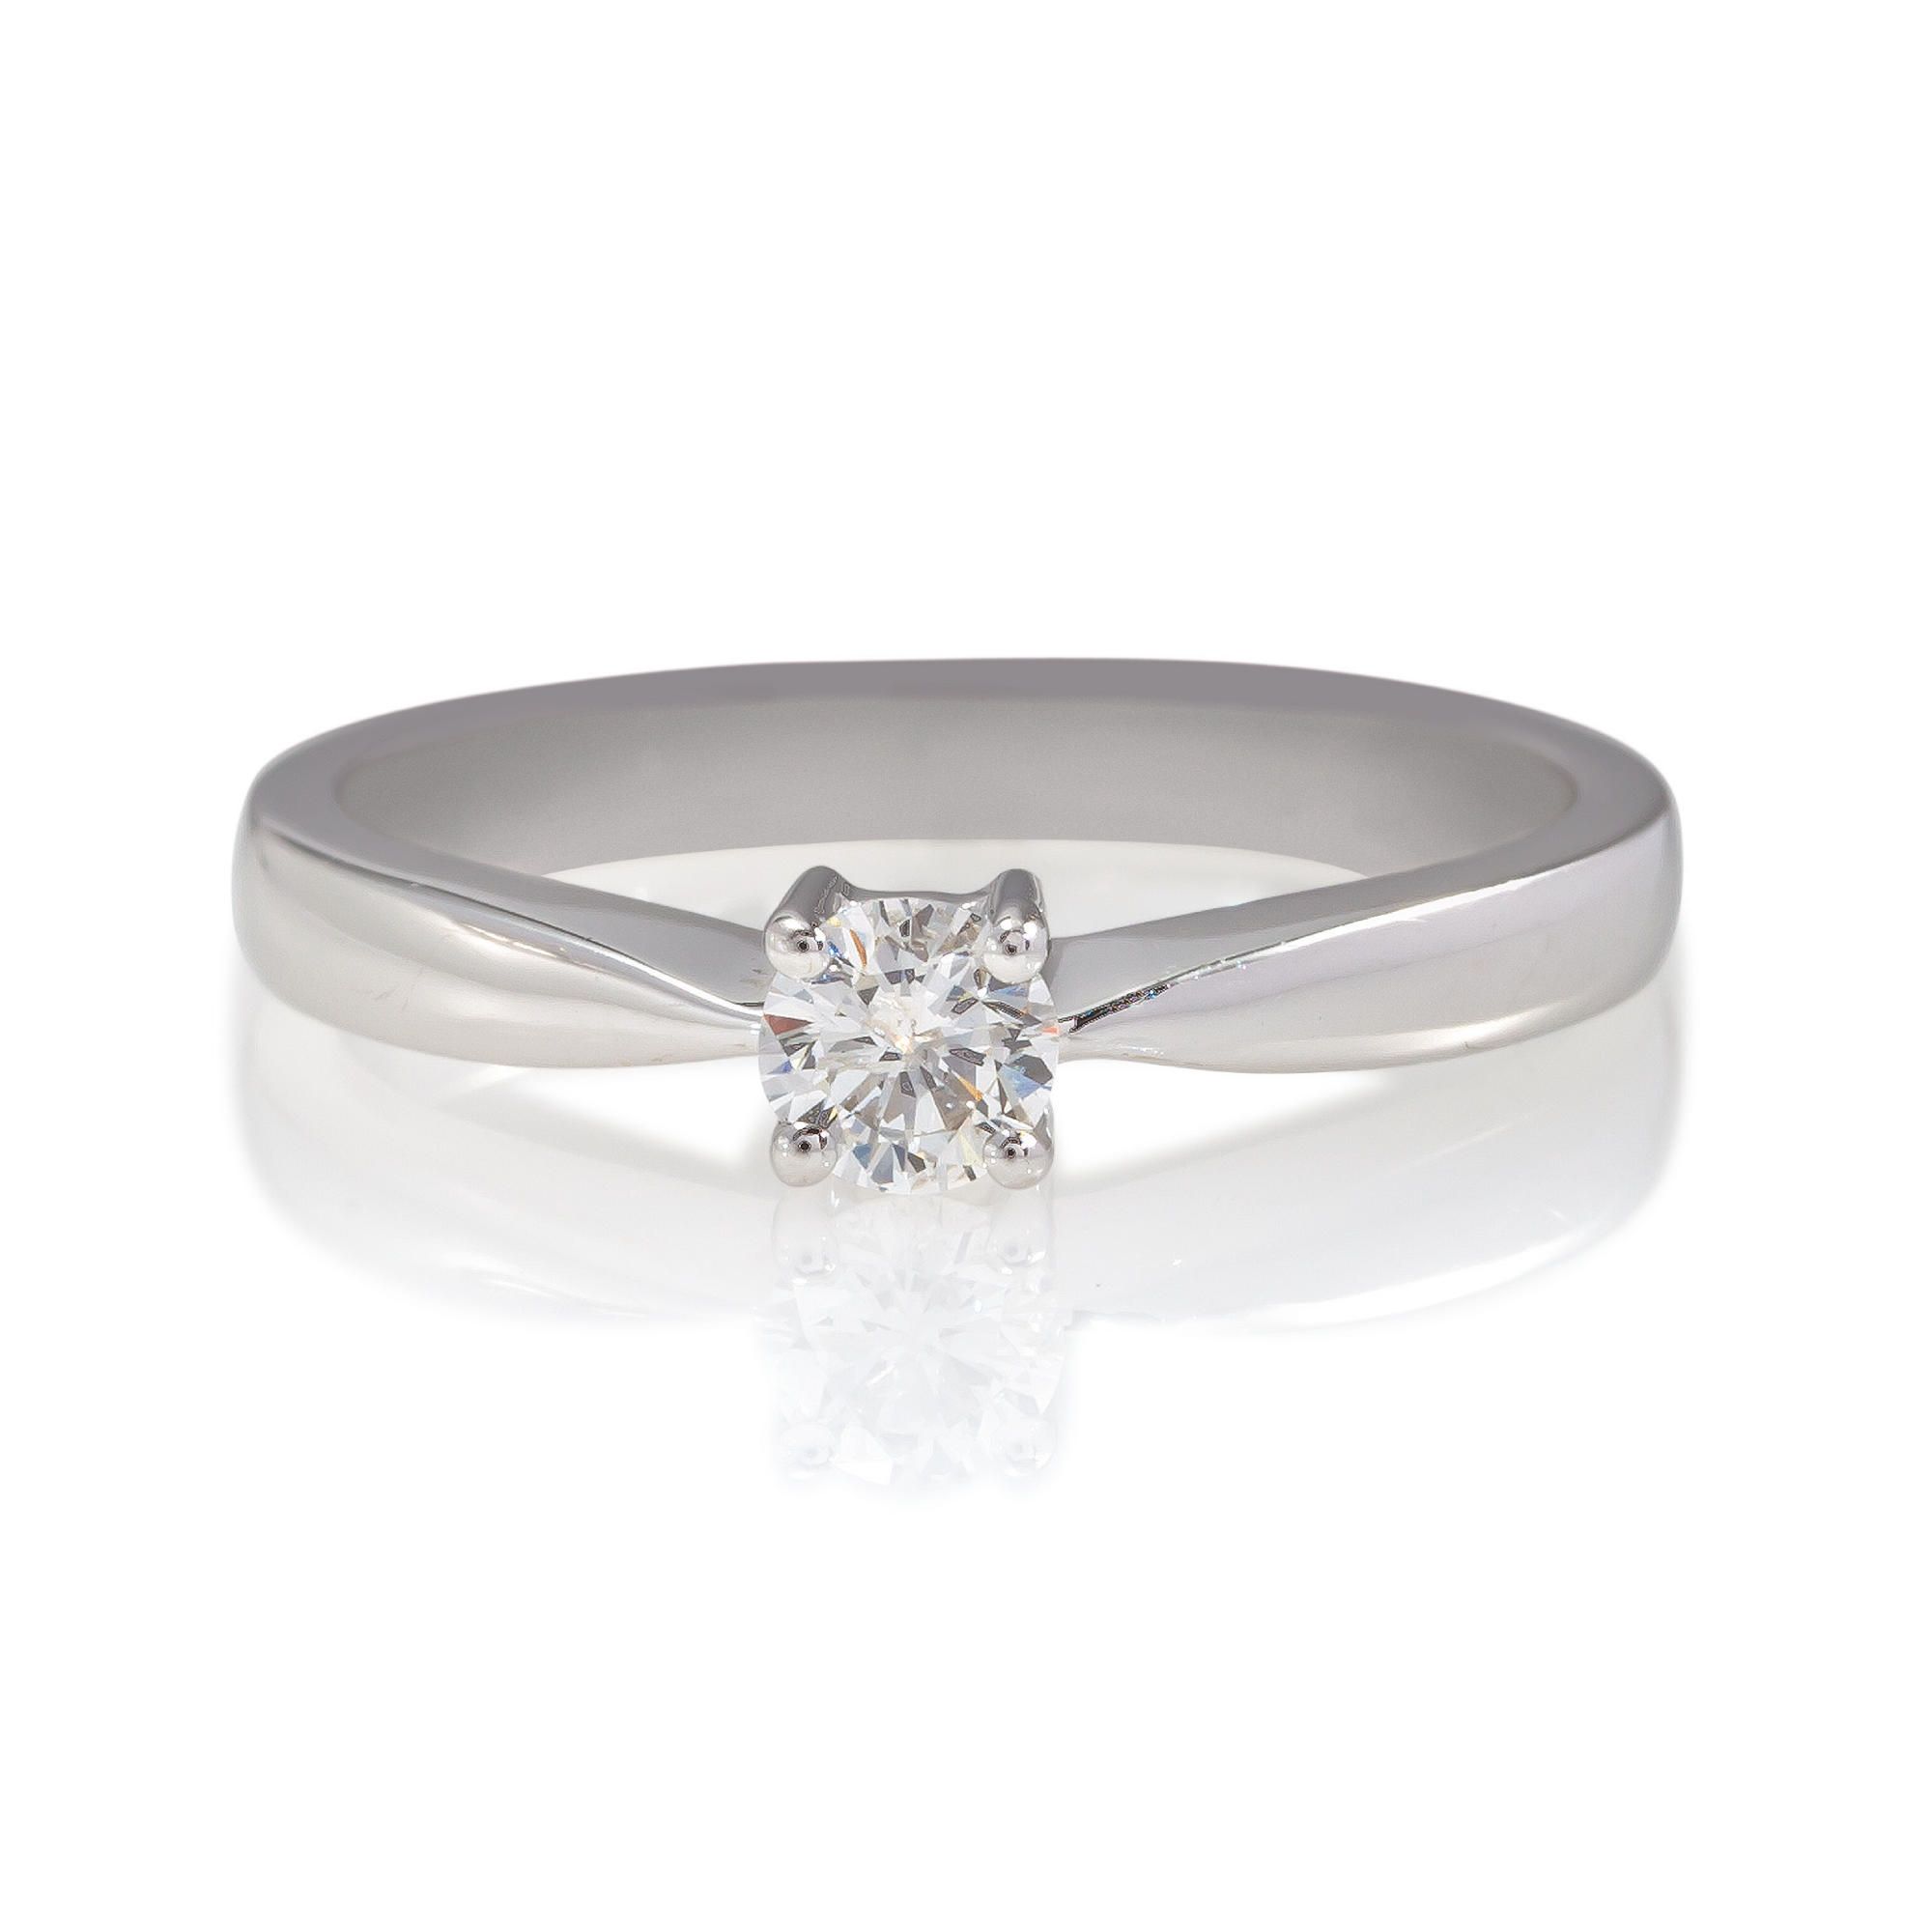 18ct White Gold 1/4ct Diamond Solitaire Ring, N at Tesco Direct